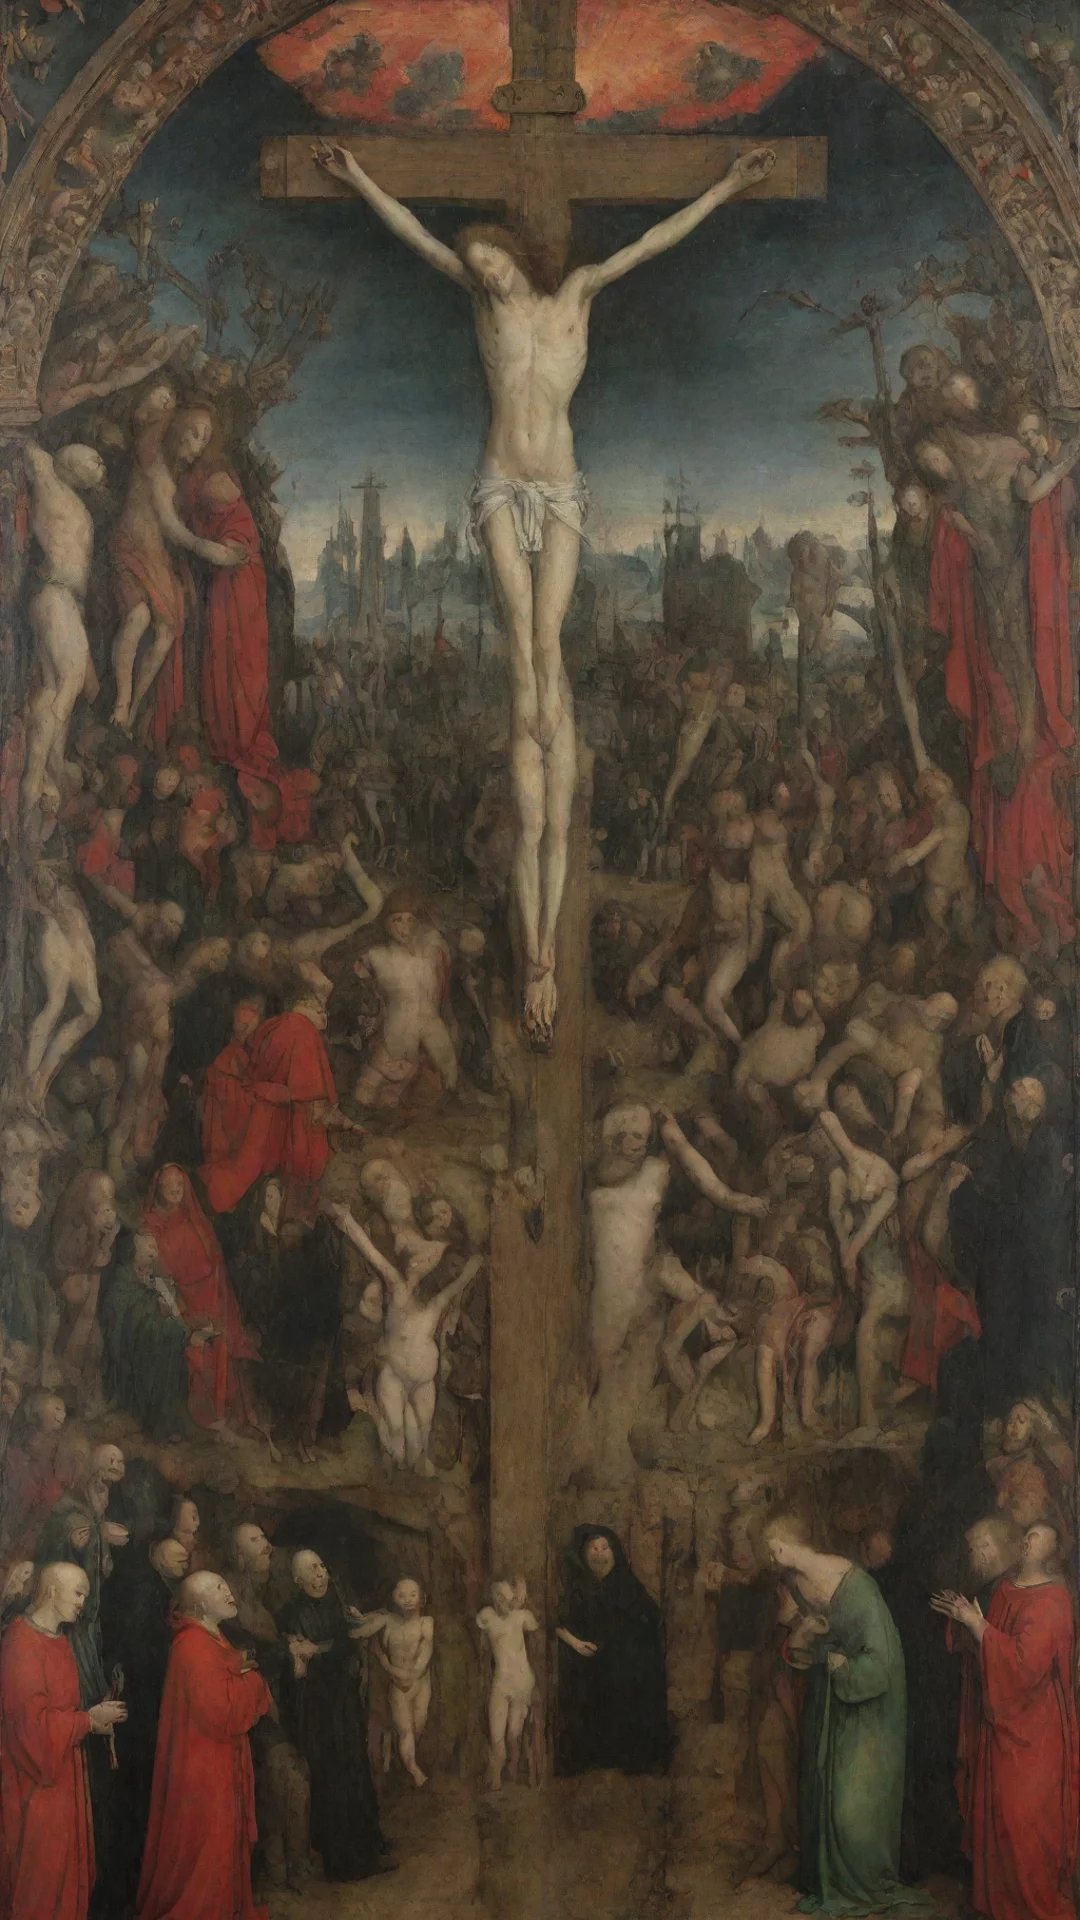 aicrucifixion and last judgement by jan van eyck tall